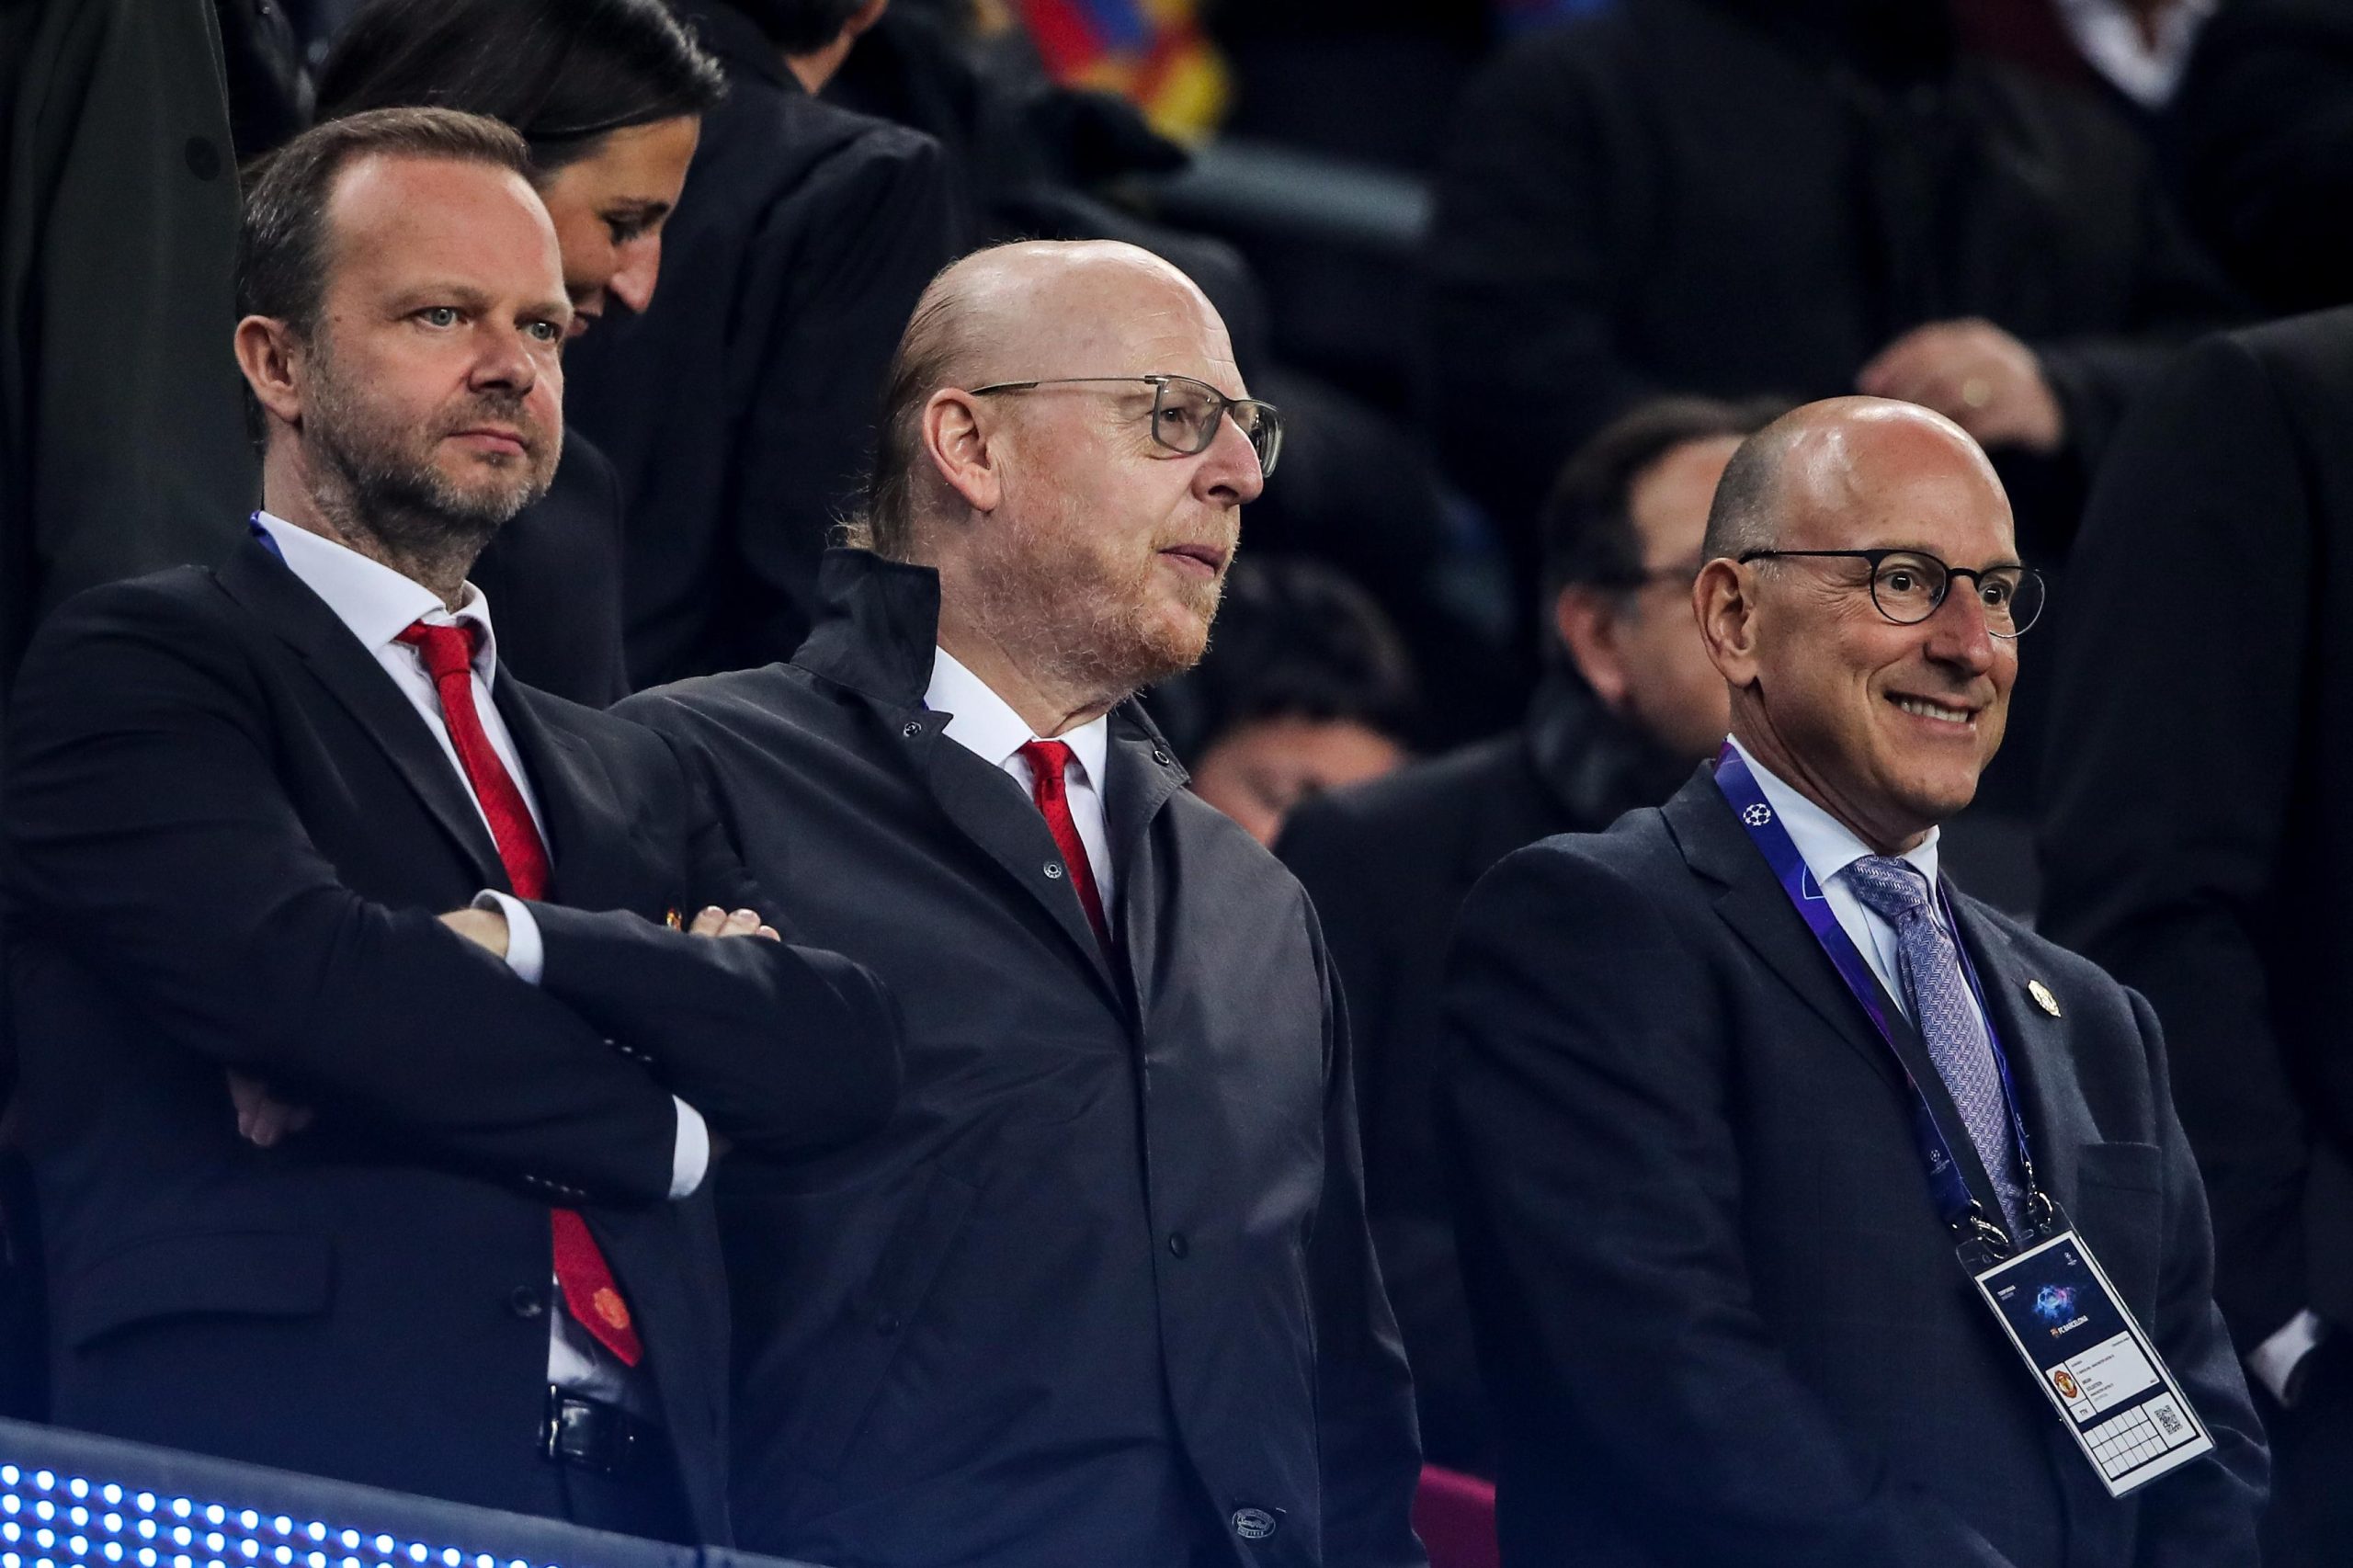 The Glazers have agreed to sell Manchester United